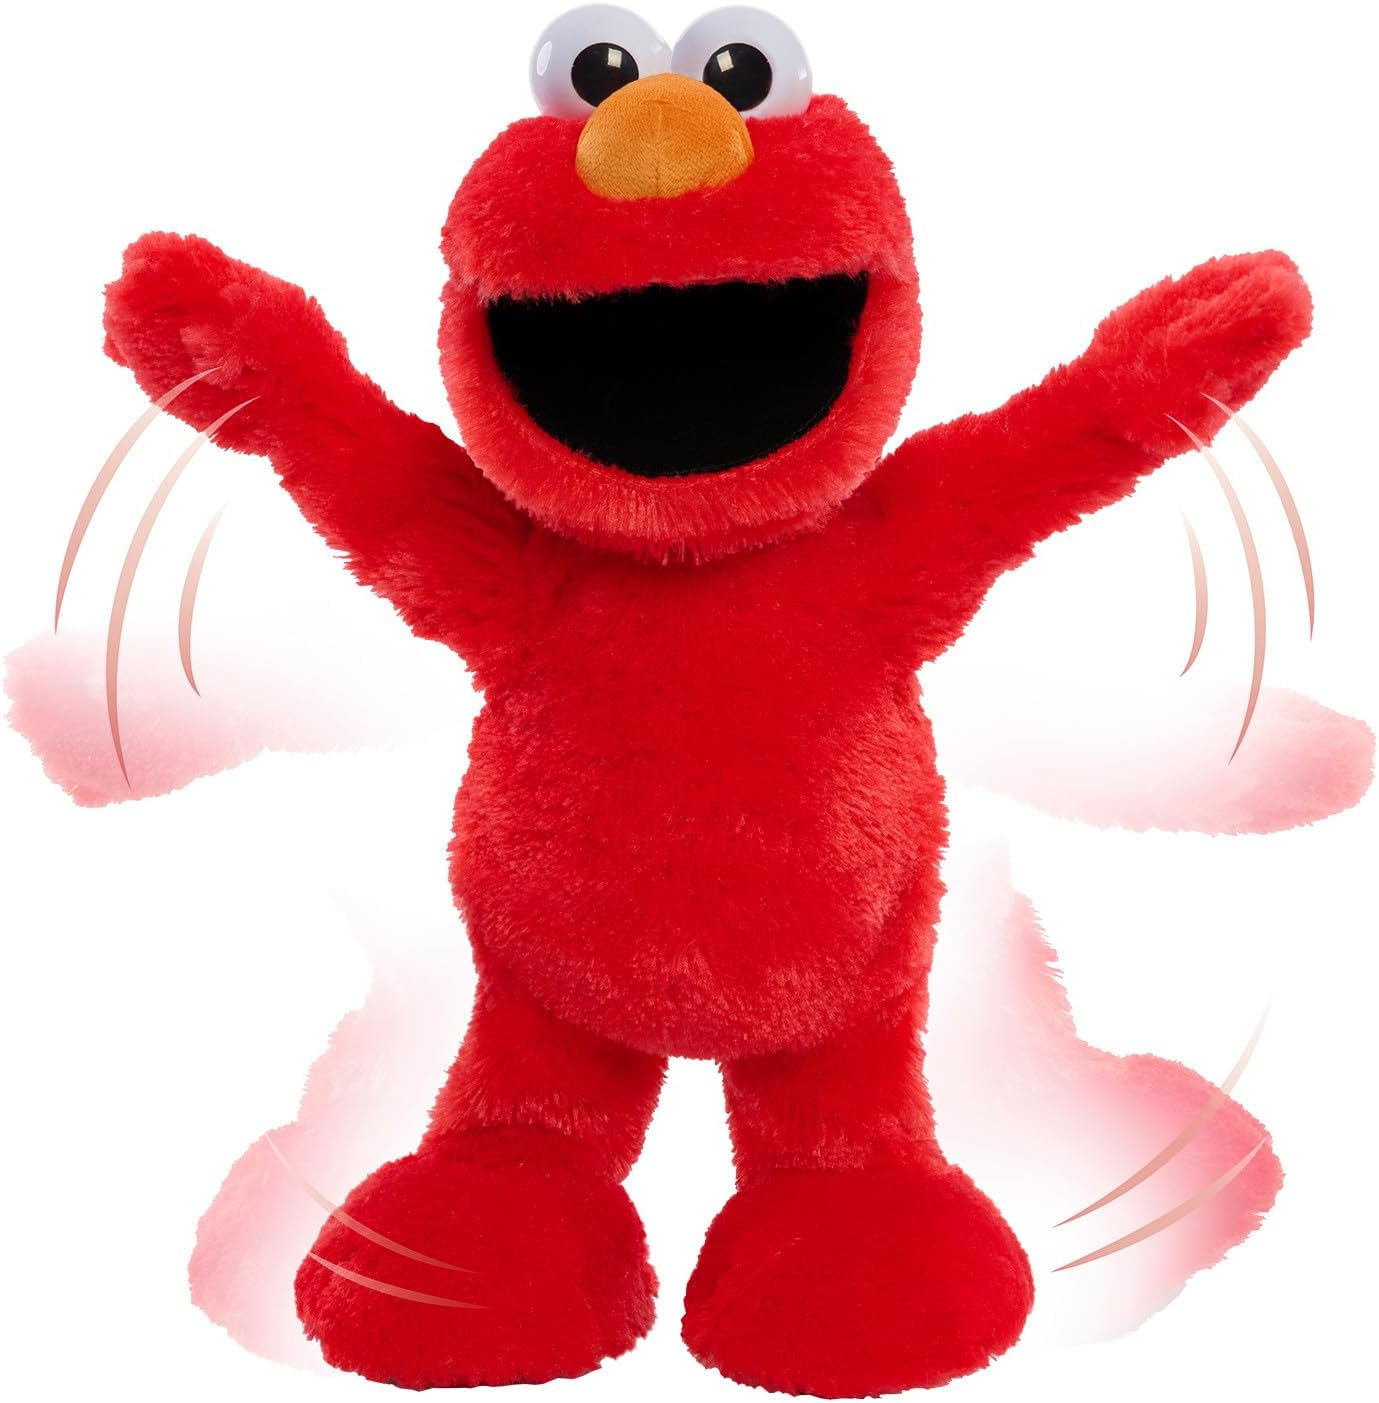 elmo doll with motion lines showing how he dances